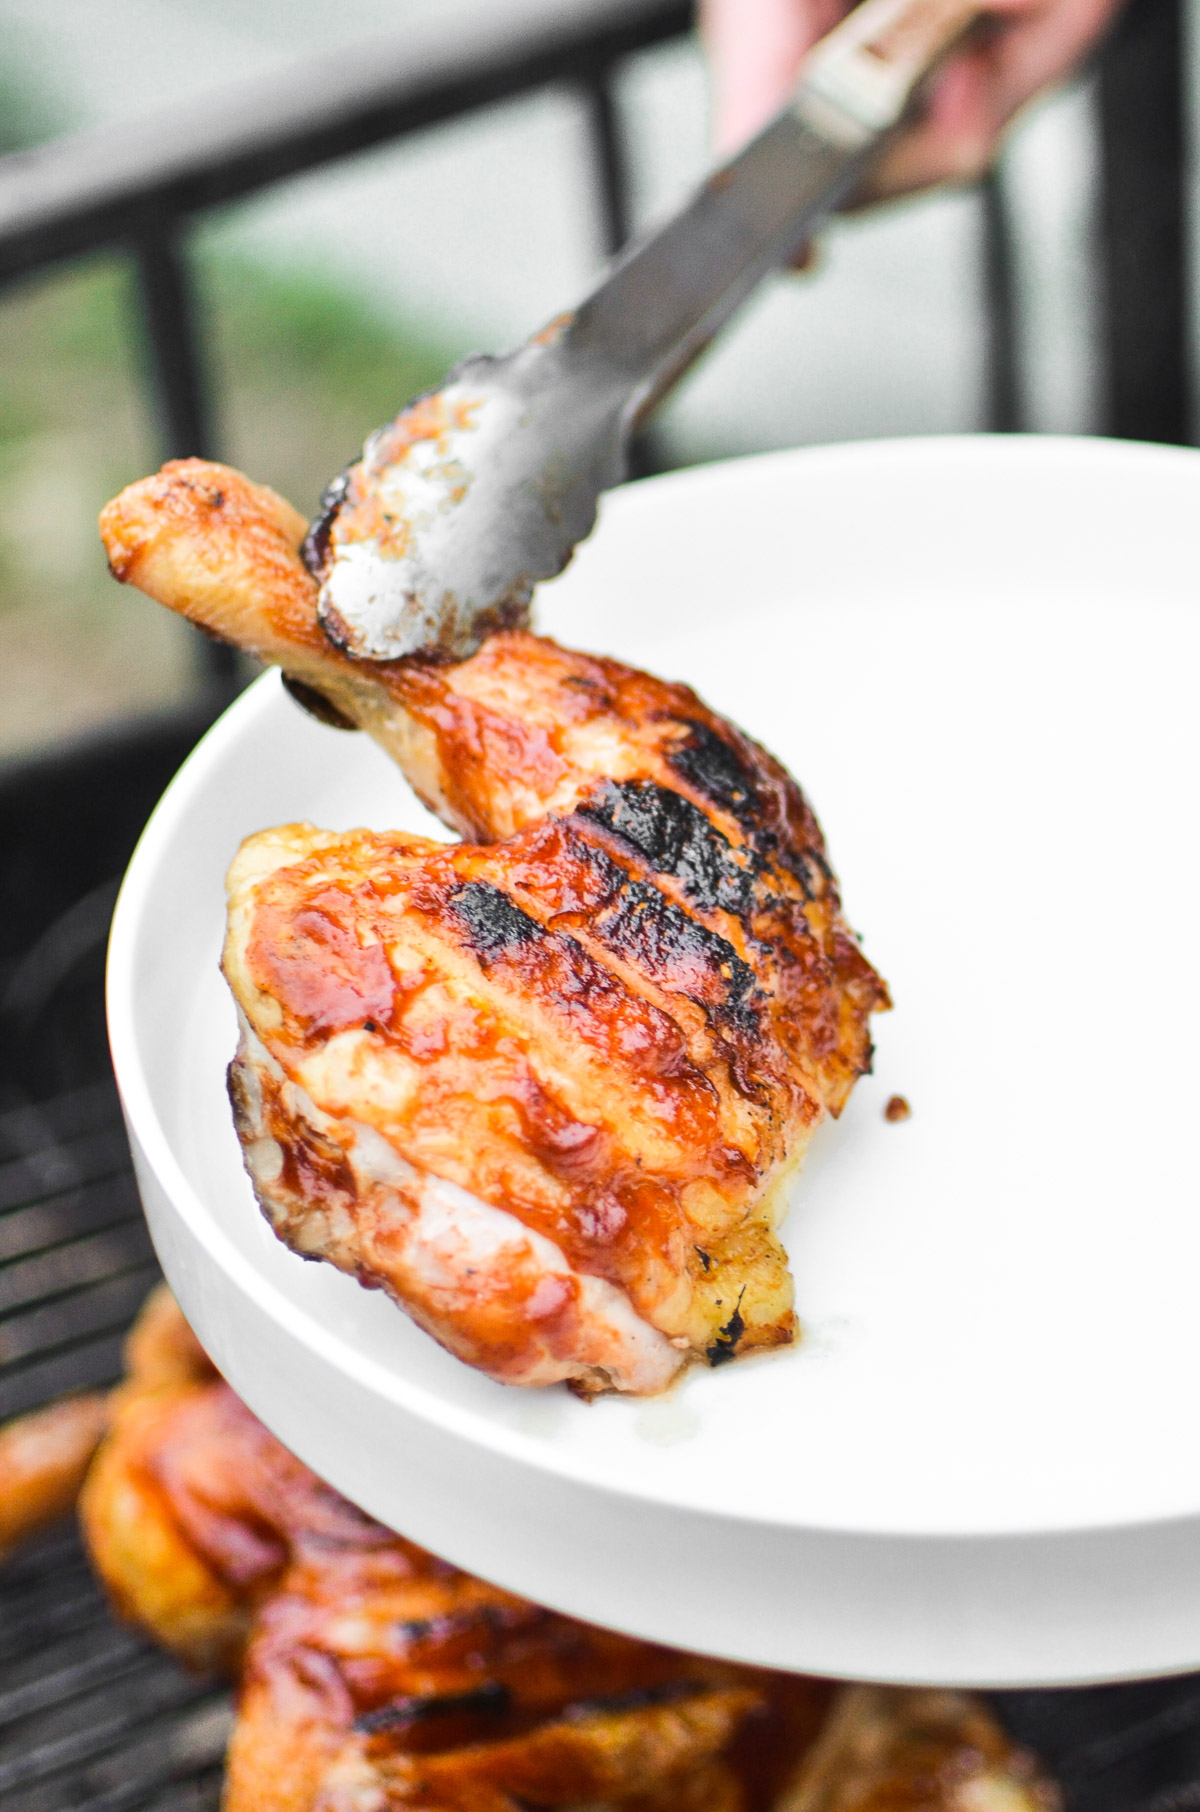 How to grill whole chicken